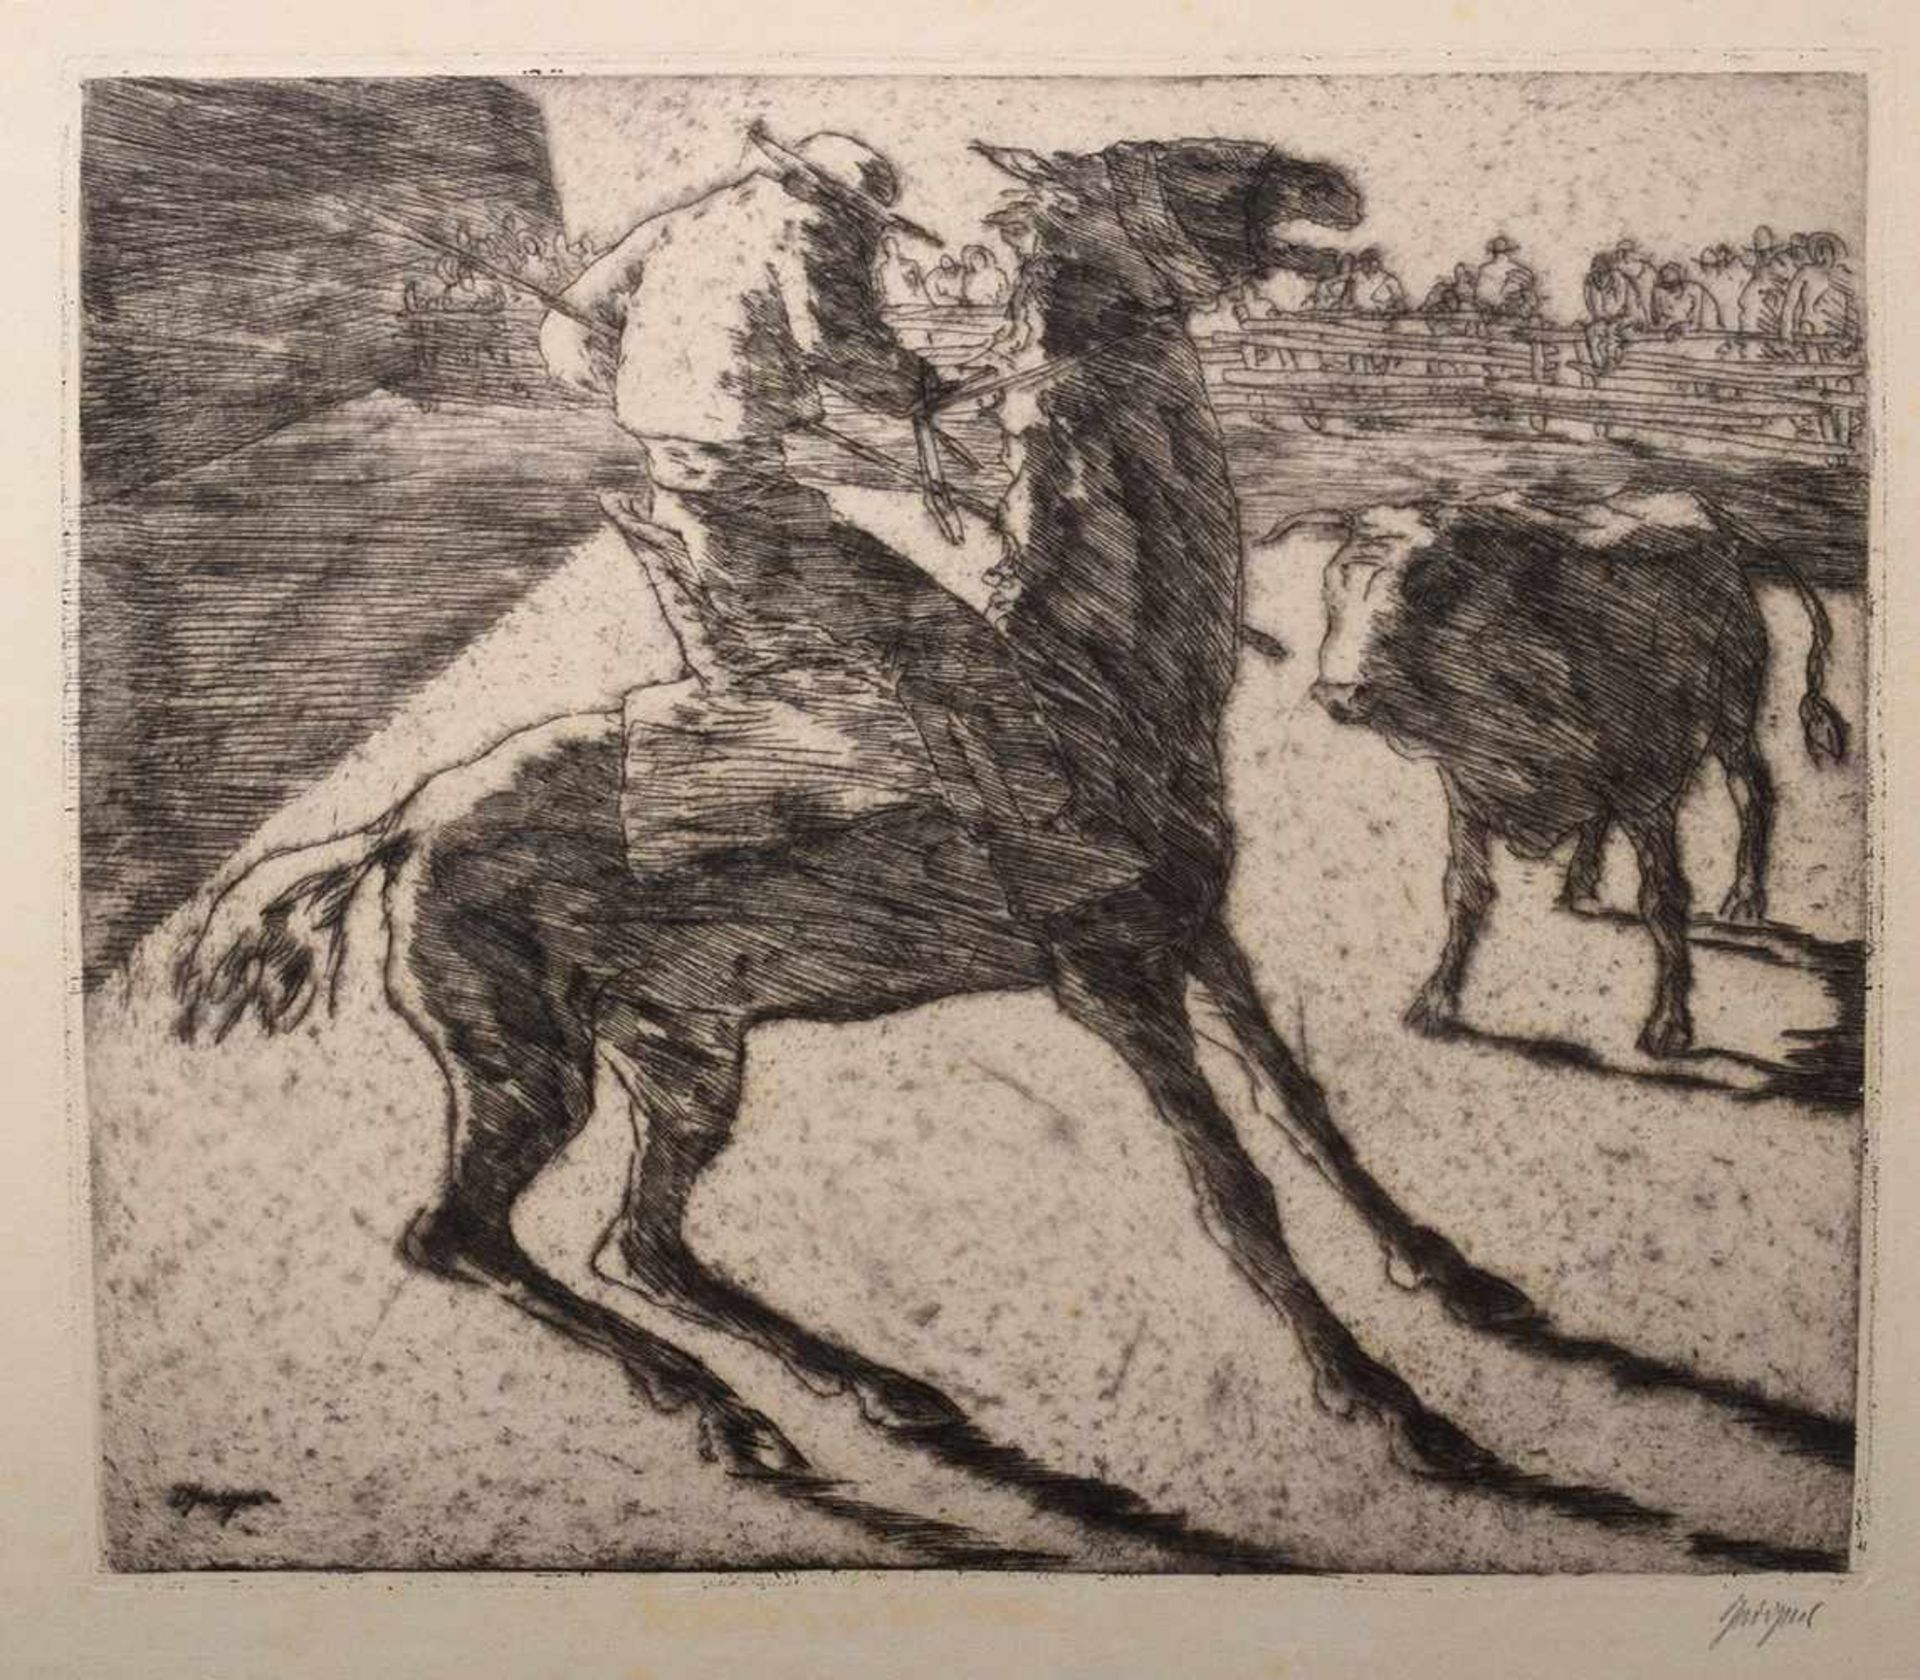 4 Various Geiger, Willi (1878-1971) "Bullfighting scenes", etchings, signed lower right, PD 15, - Bild 5 aus 5